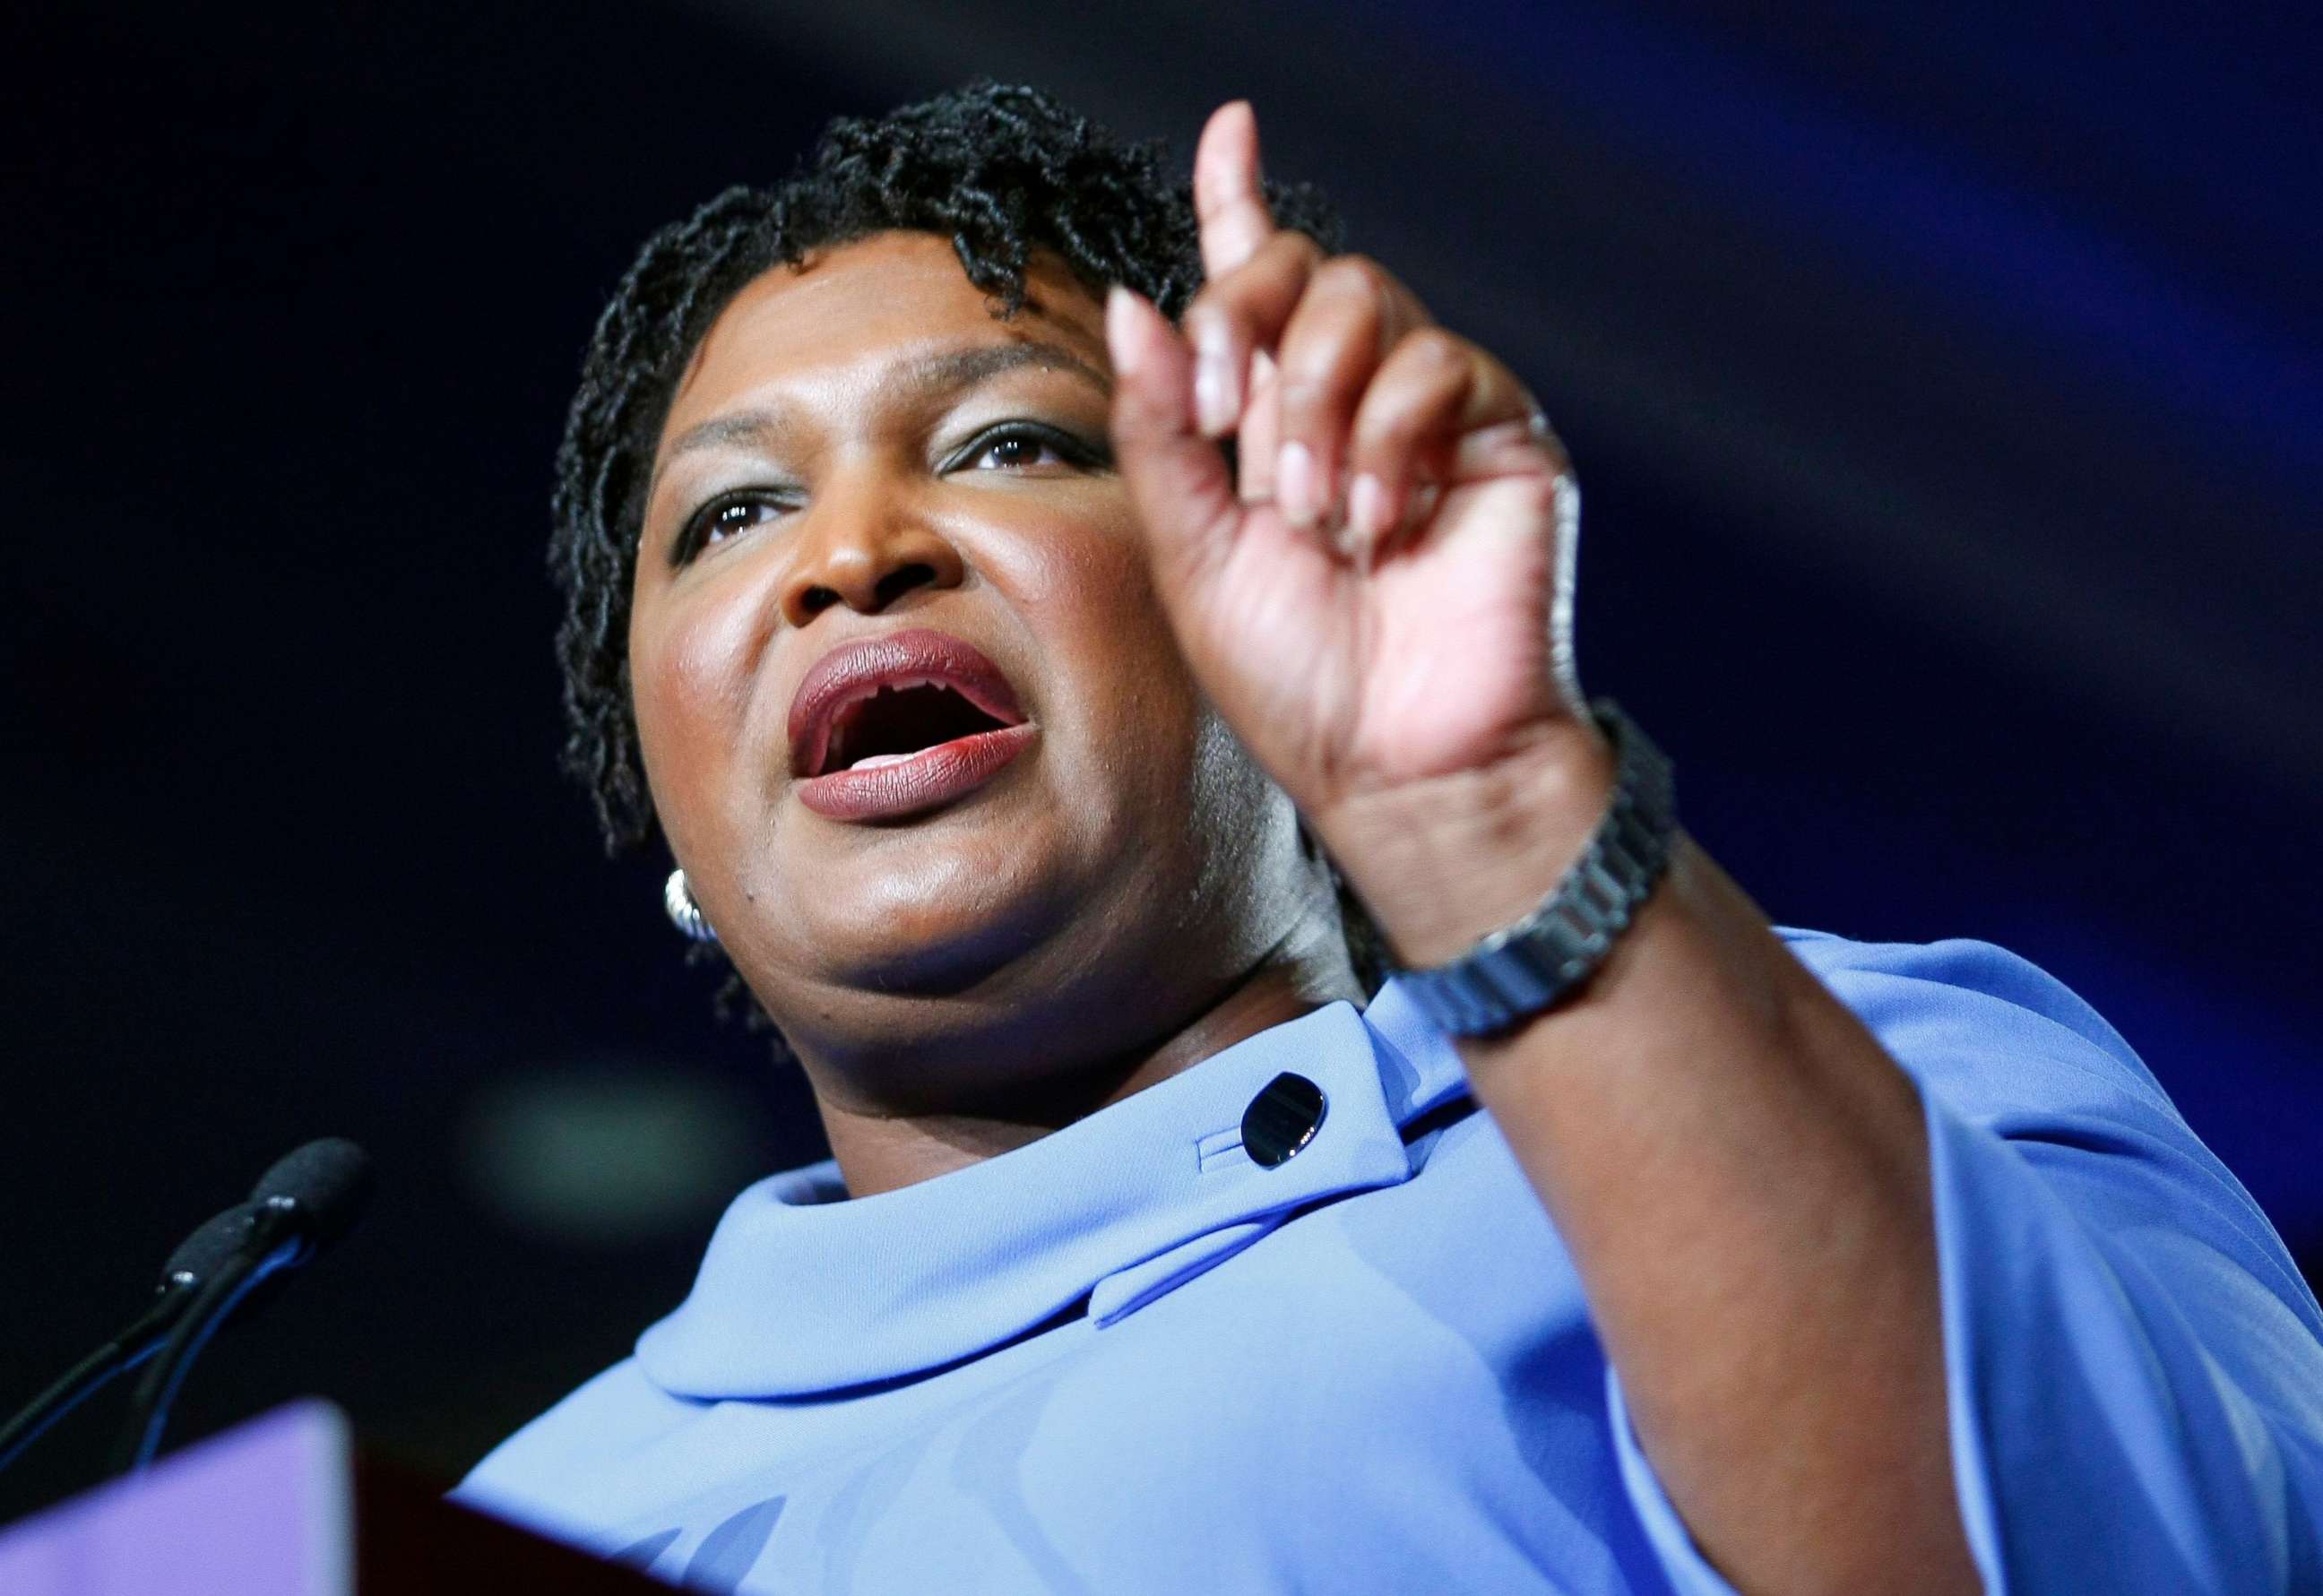 PHOTO: Democratic Gubernatorial candidate Stacey Abrams speaks to supporters and refuses to concede at her election night headquarters at the Hyatt Regency in Atlanta, Nov. 6, 2018.